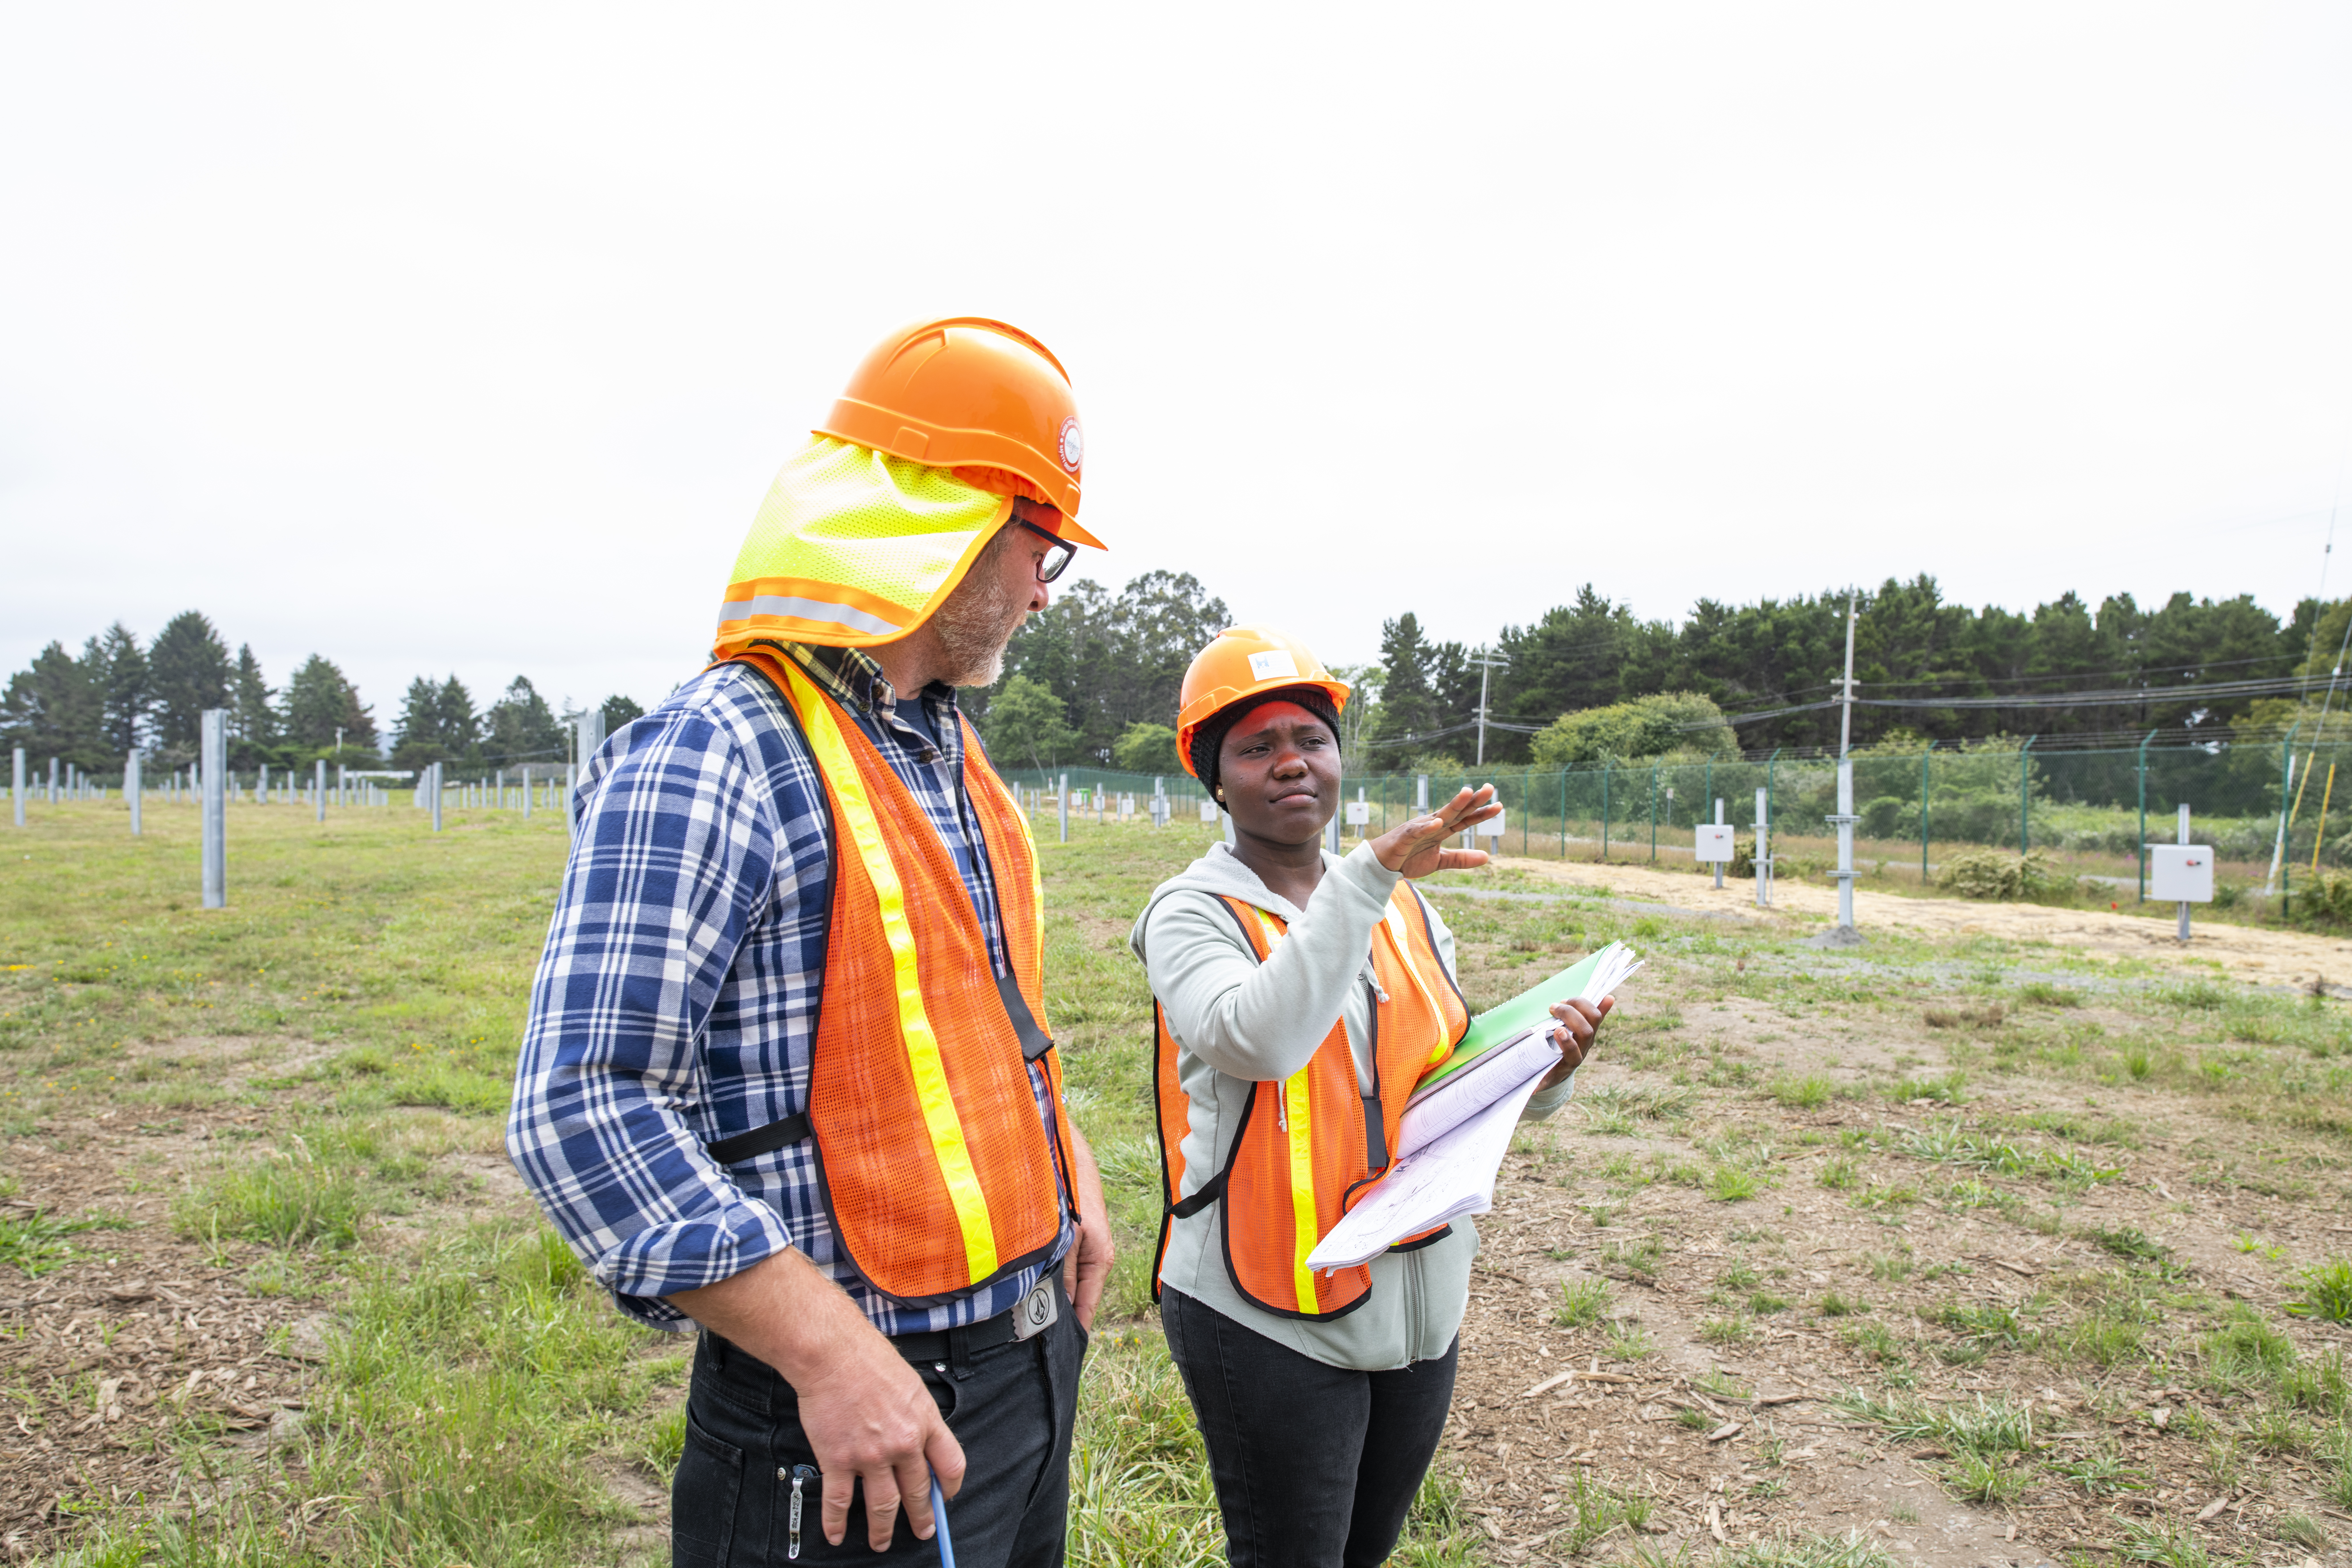 Two engineers in construction gear discuss plans in an open field